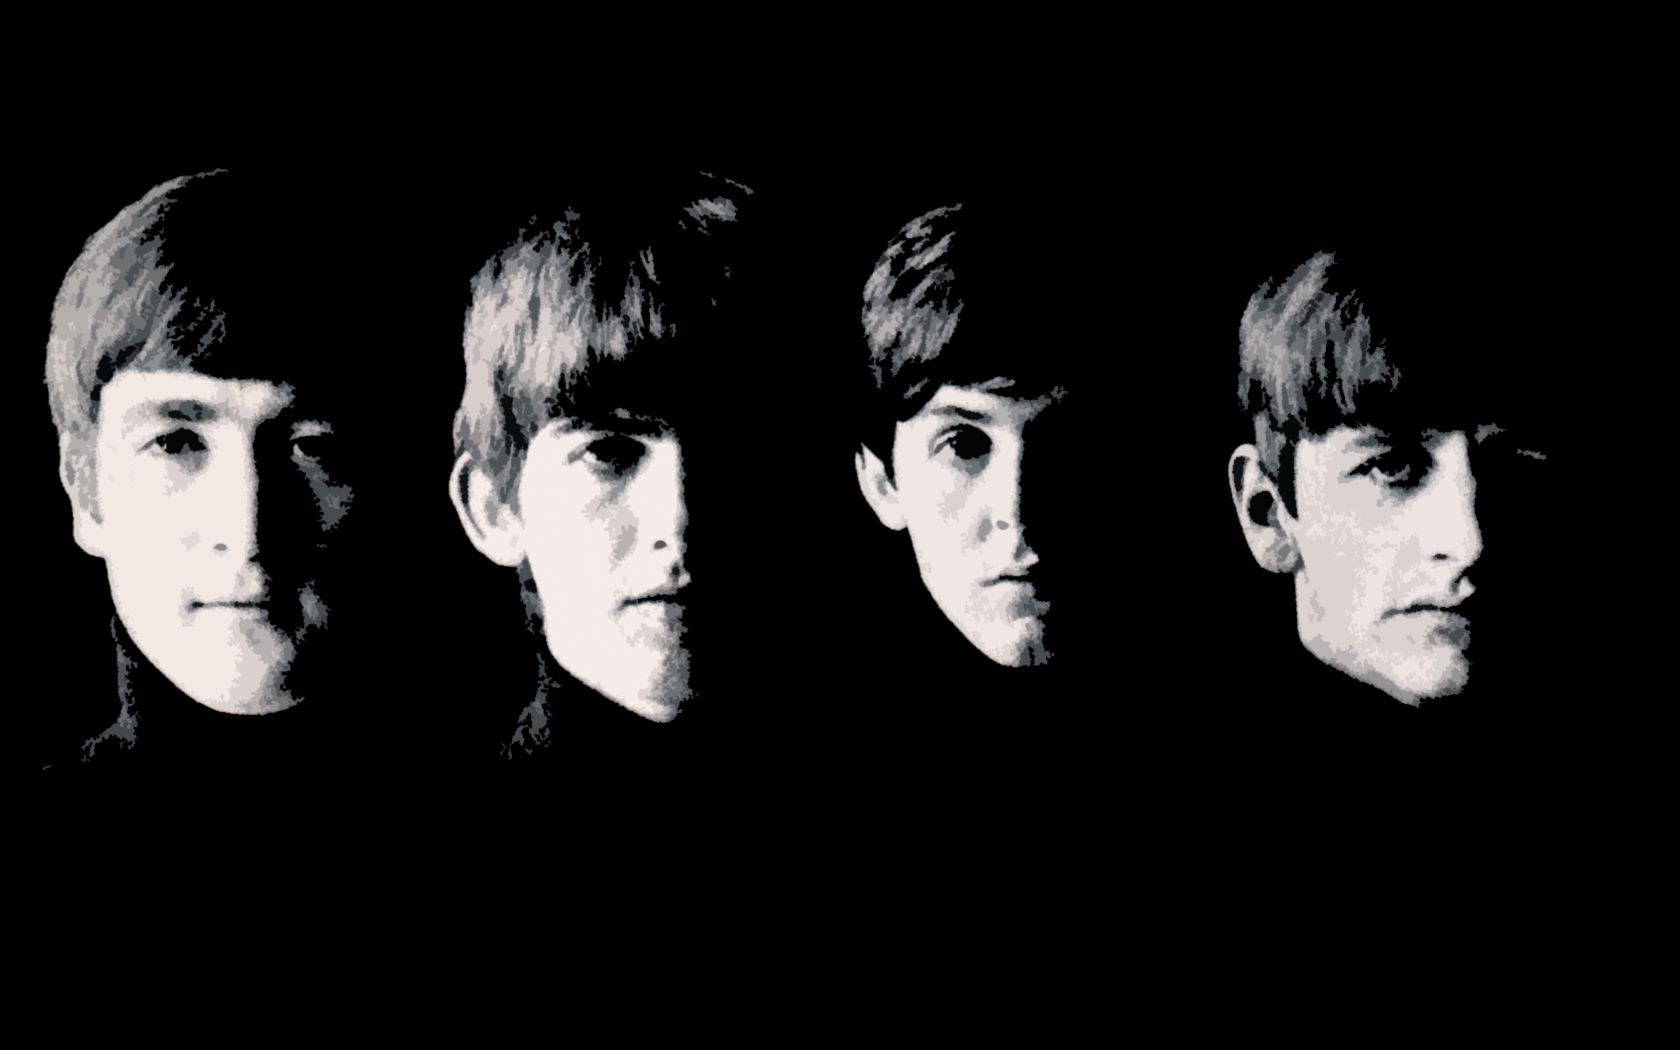 The Beatles Wallpaper Full HD For PC Download 46094 Full HD ...